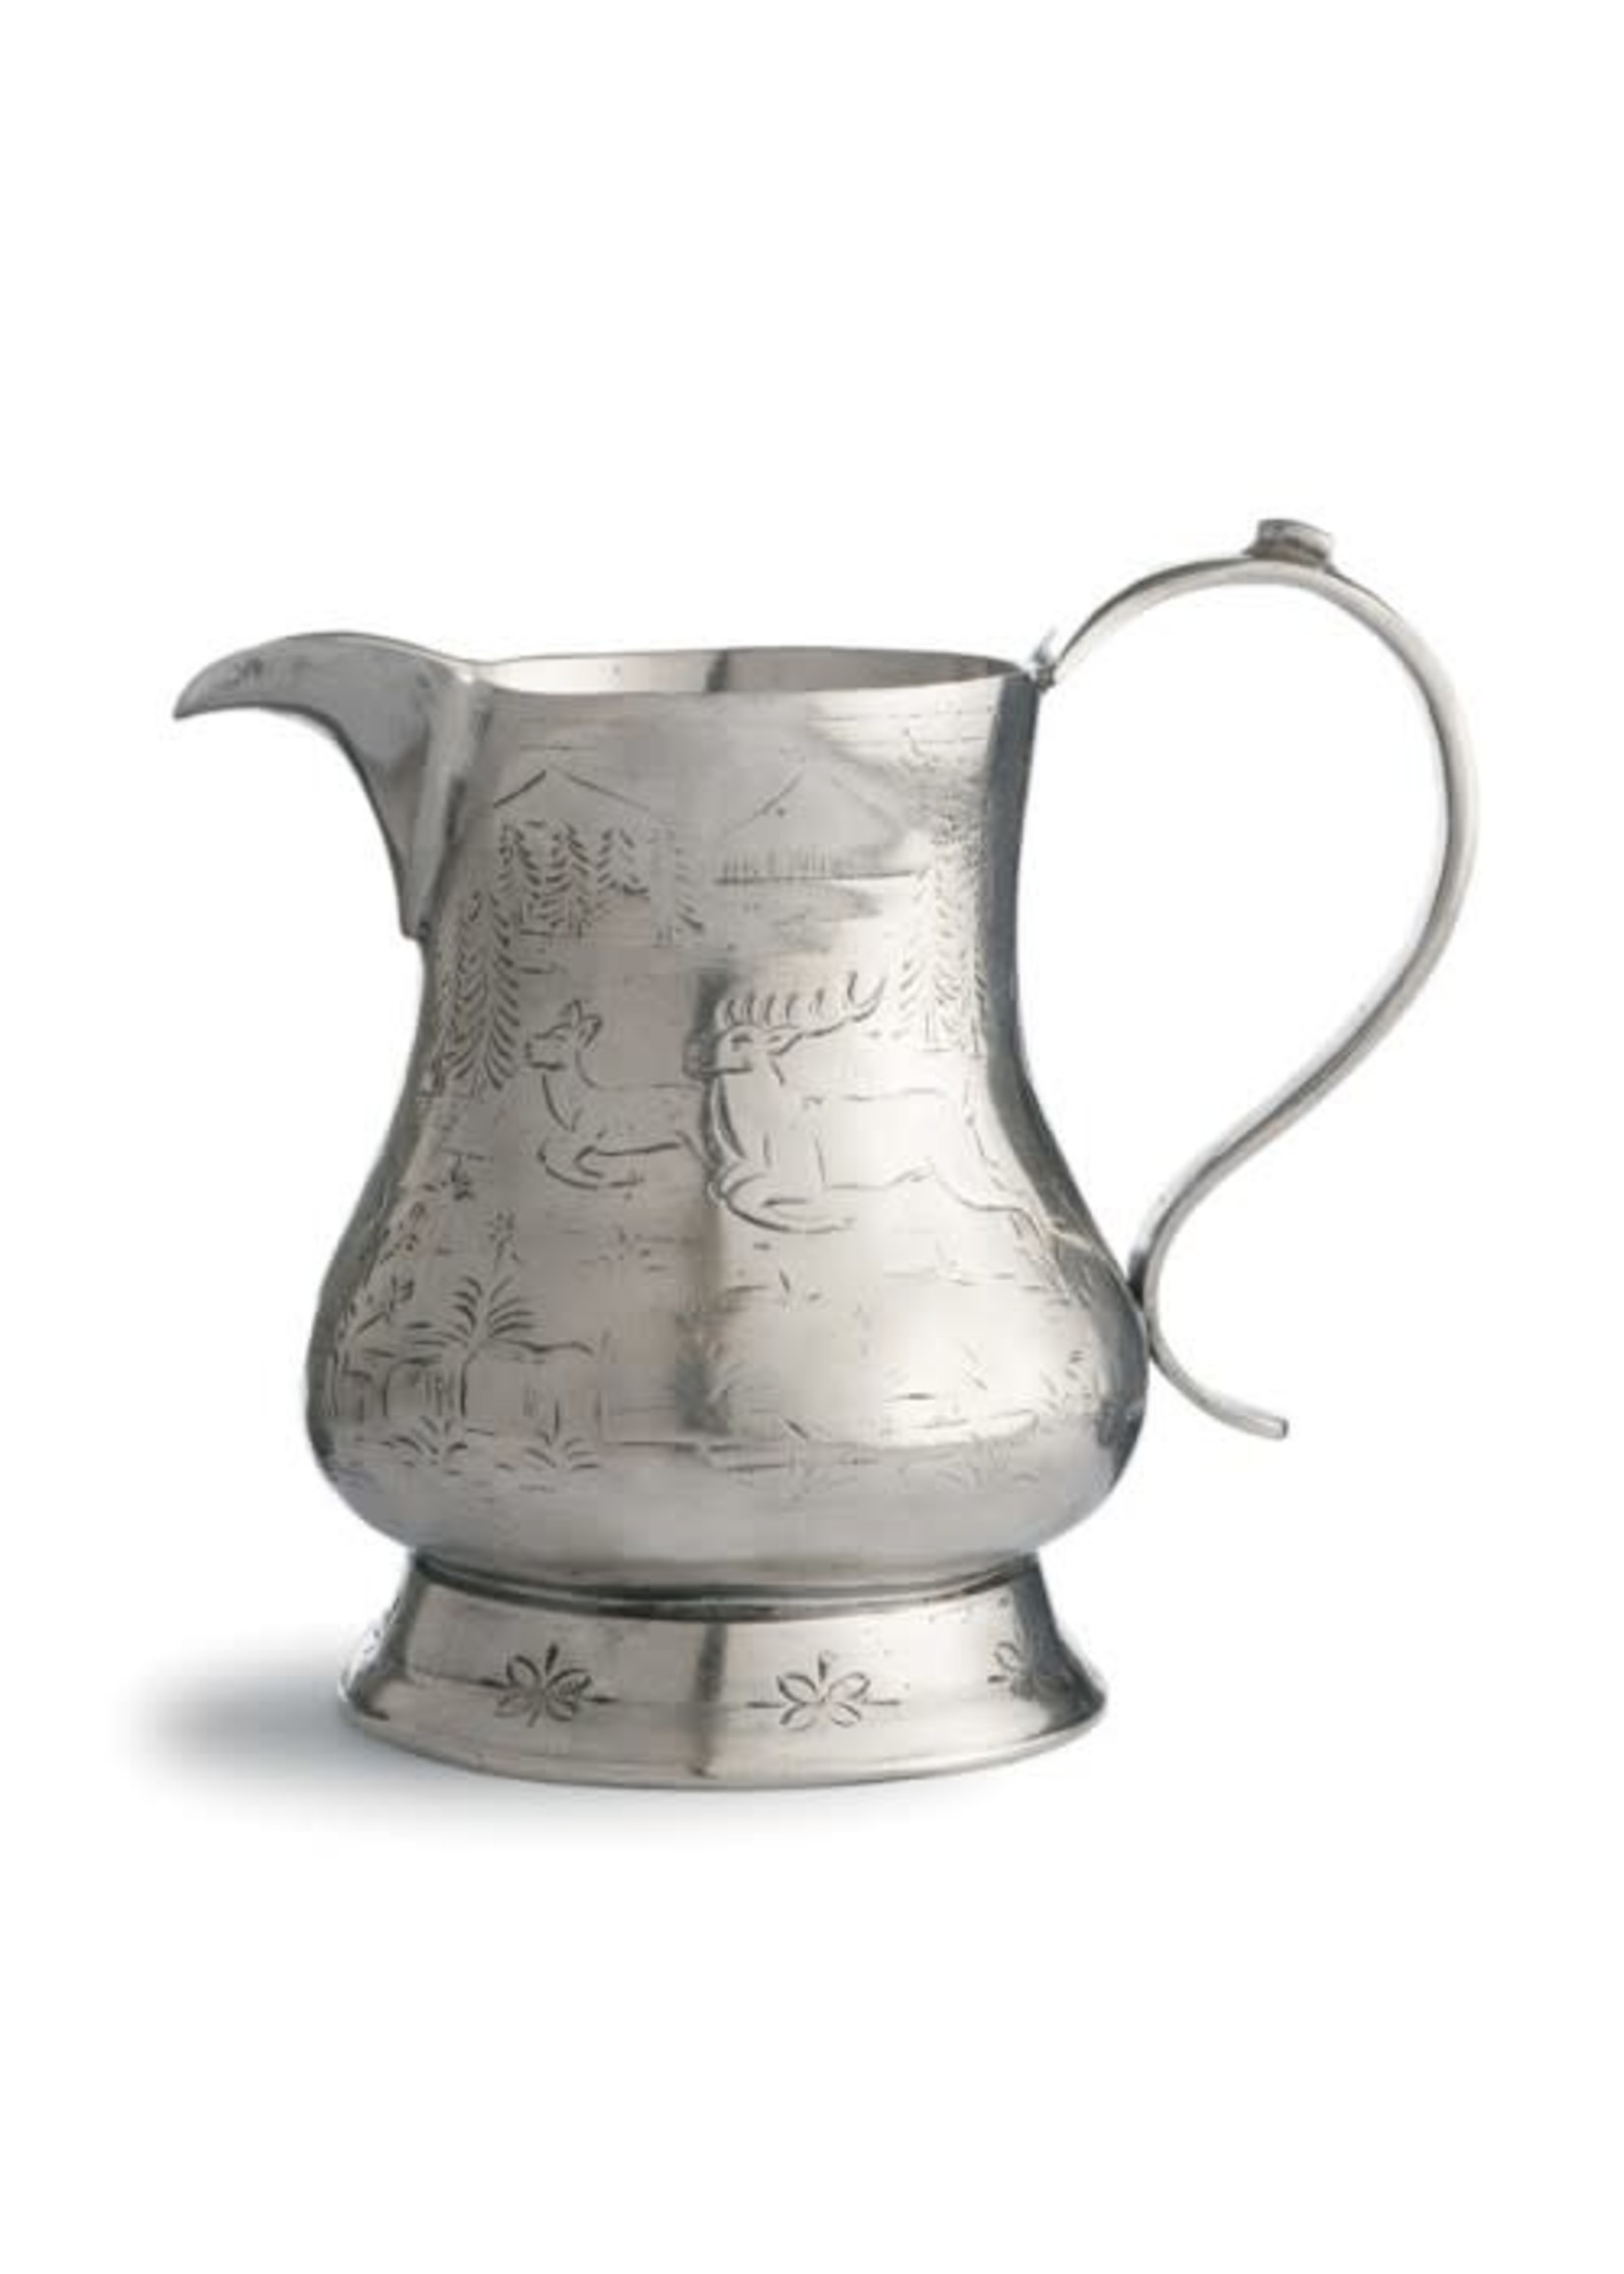 Arte Italica Pewter Vintage Mold - Pitcher with Deer